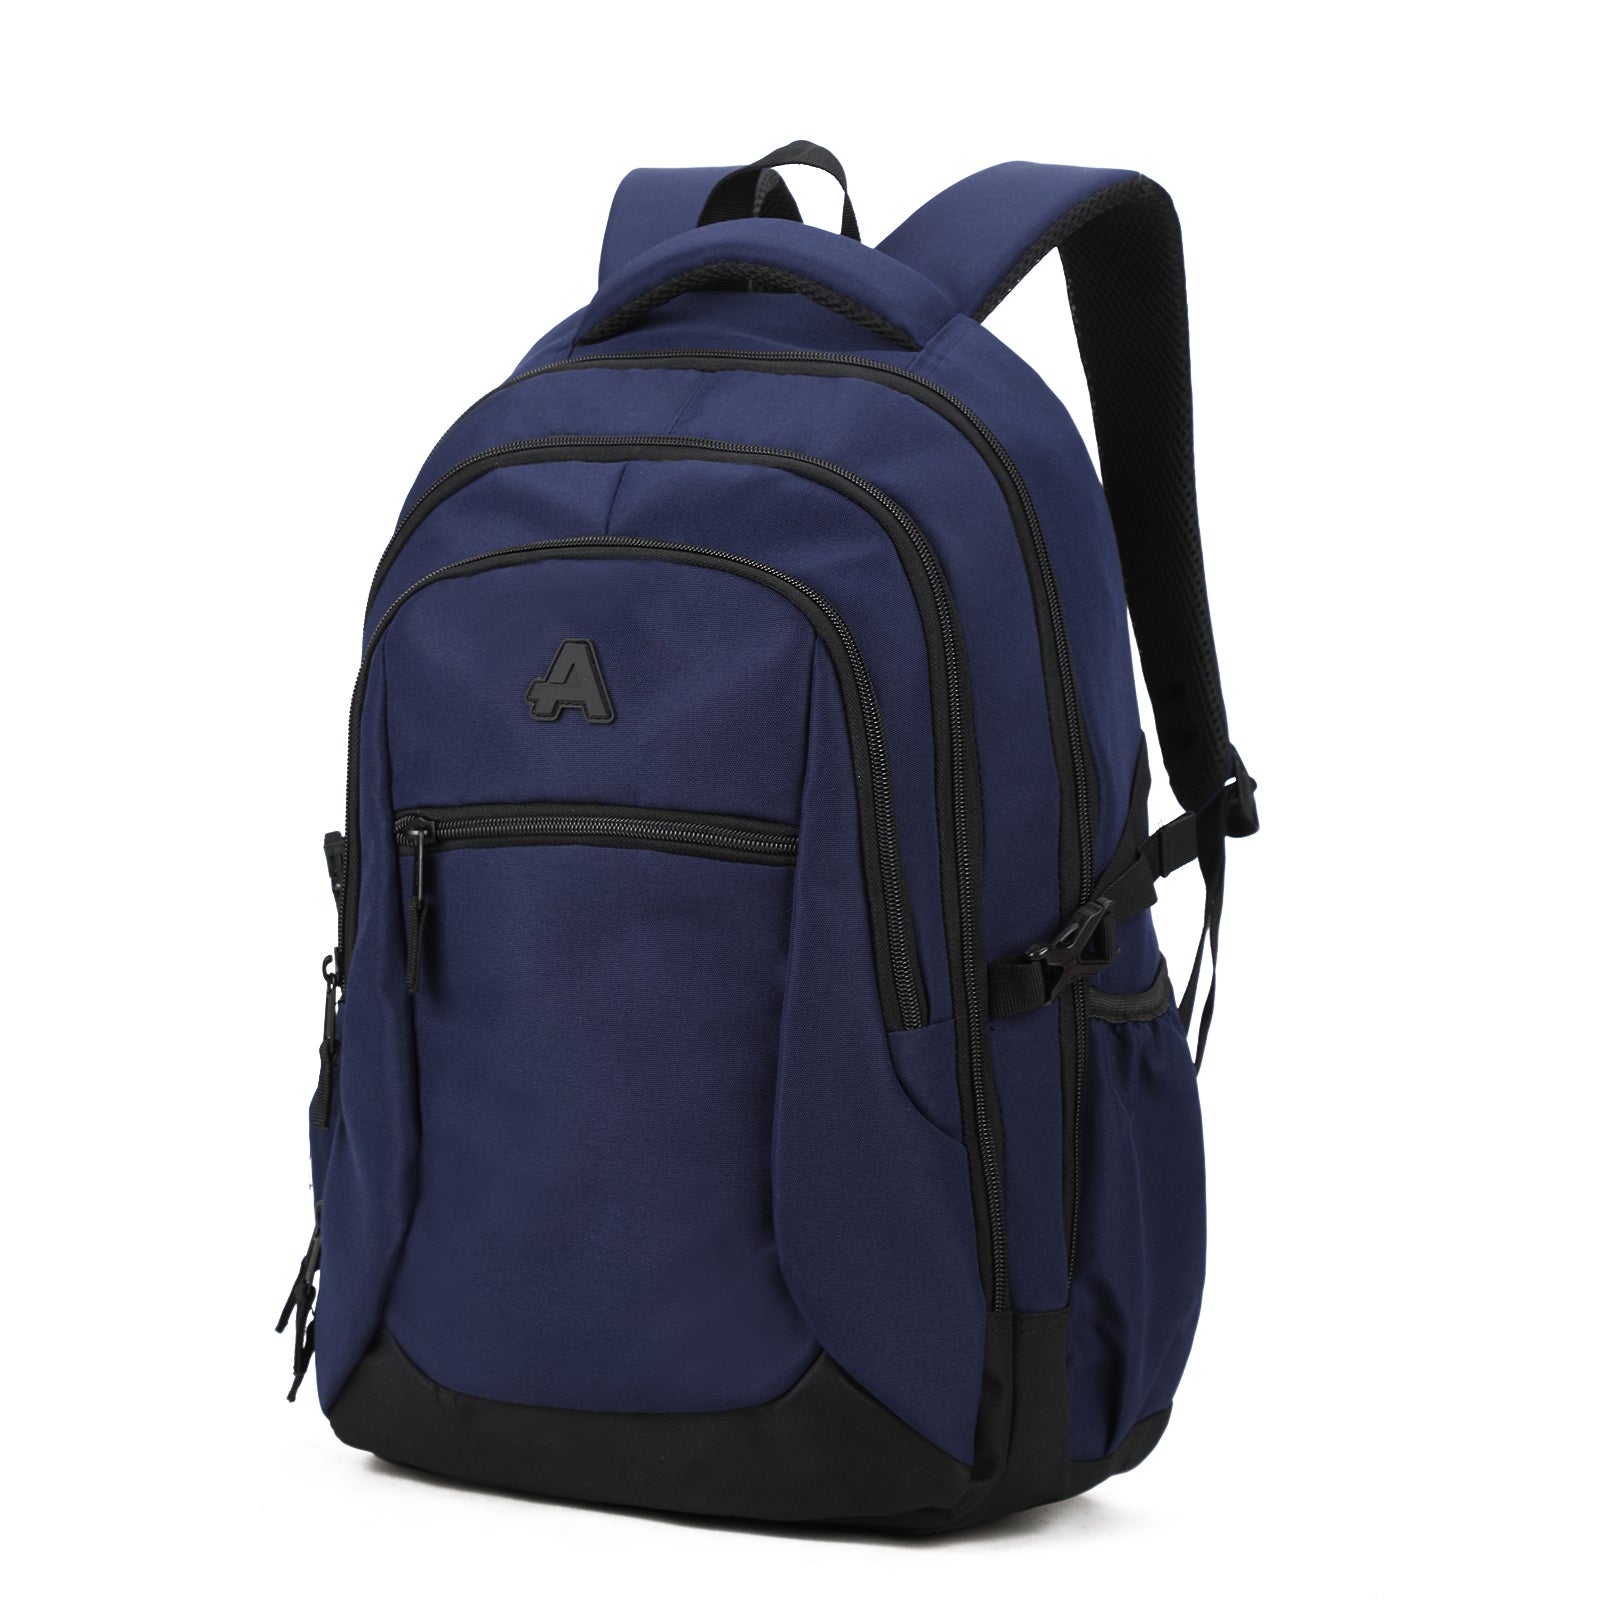 Aoking Travel Backpack SN2677 Navy